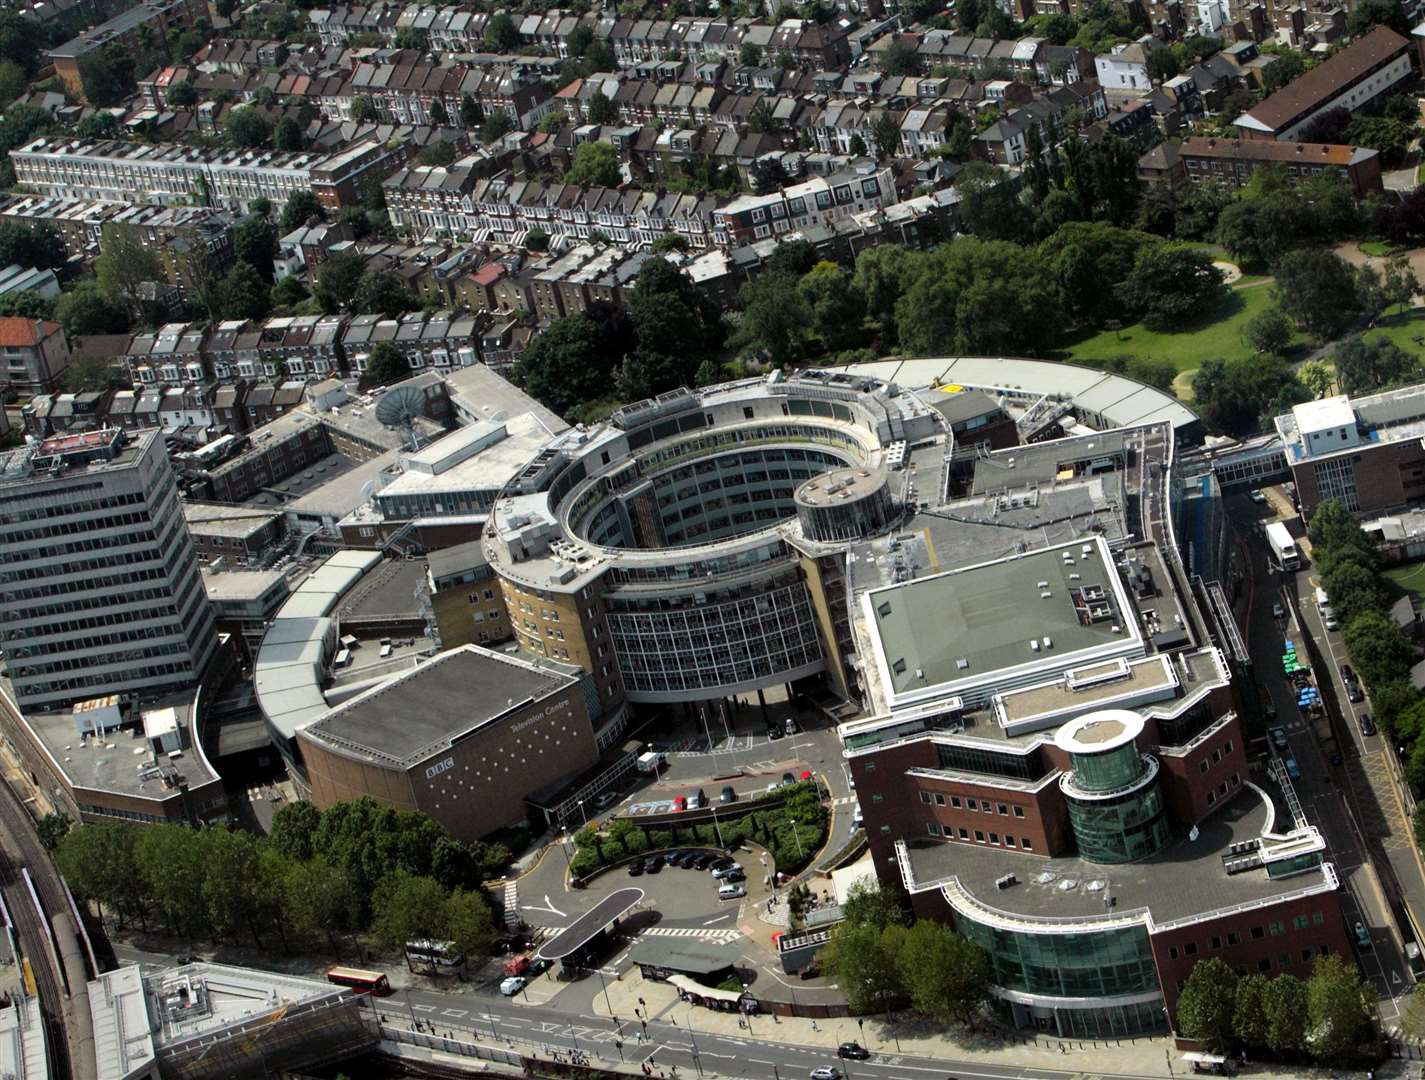 A burglary took place at BBC Television Centre (Steve Parsons/PA)